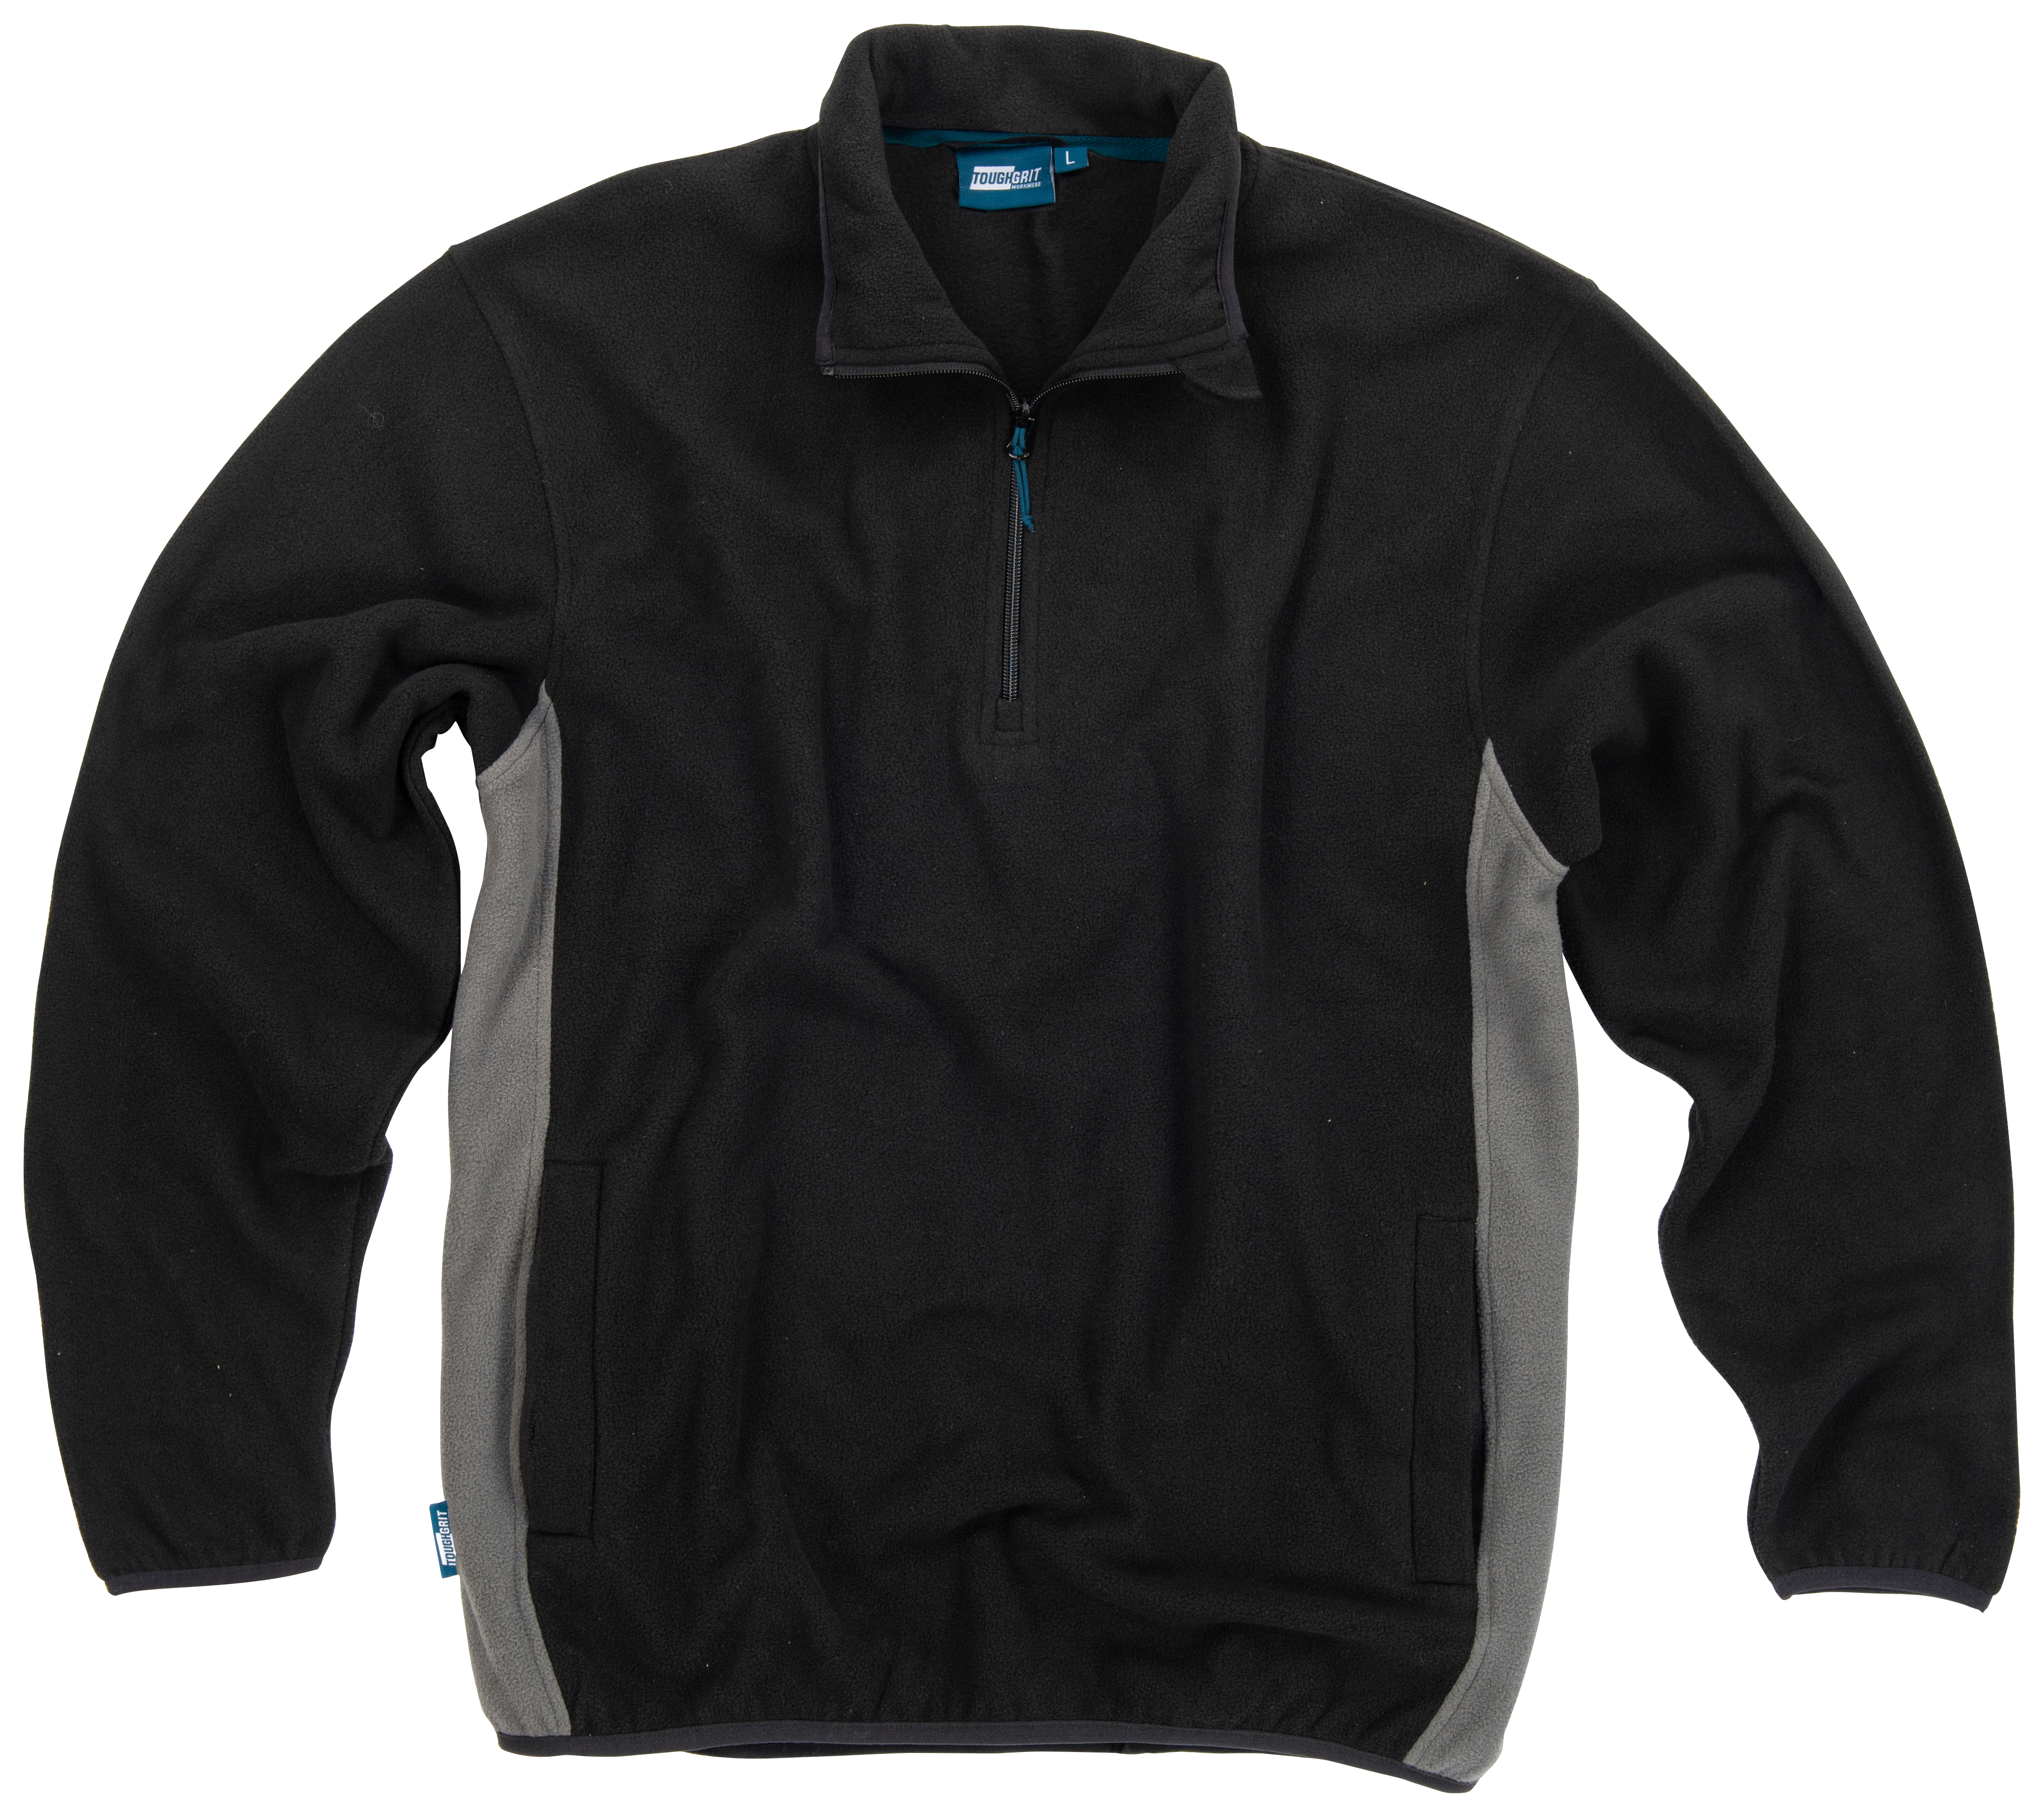 Image of Tough Grit 1/4 Zip Fleece, in Black and Grey Quick-Drying, Size: L